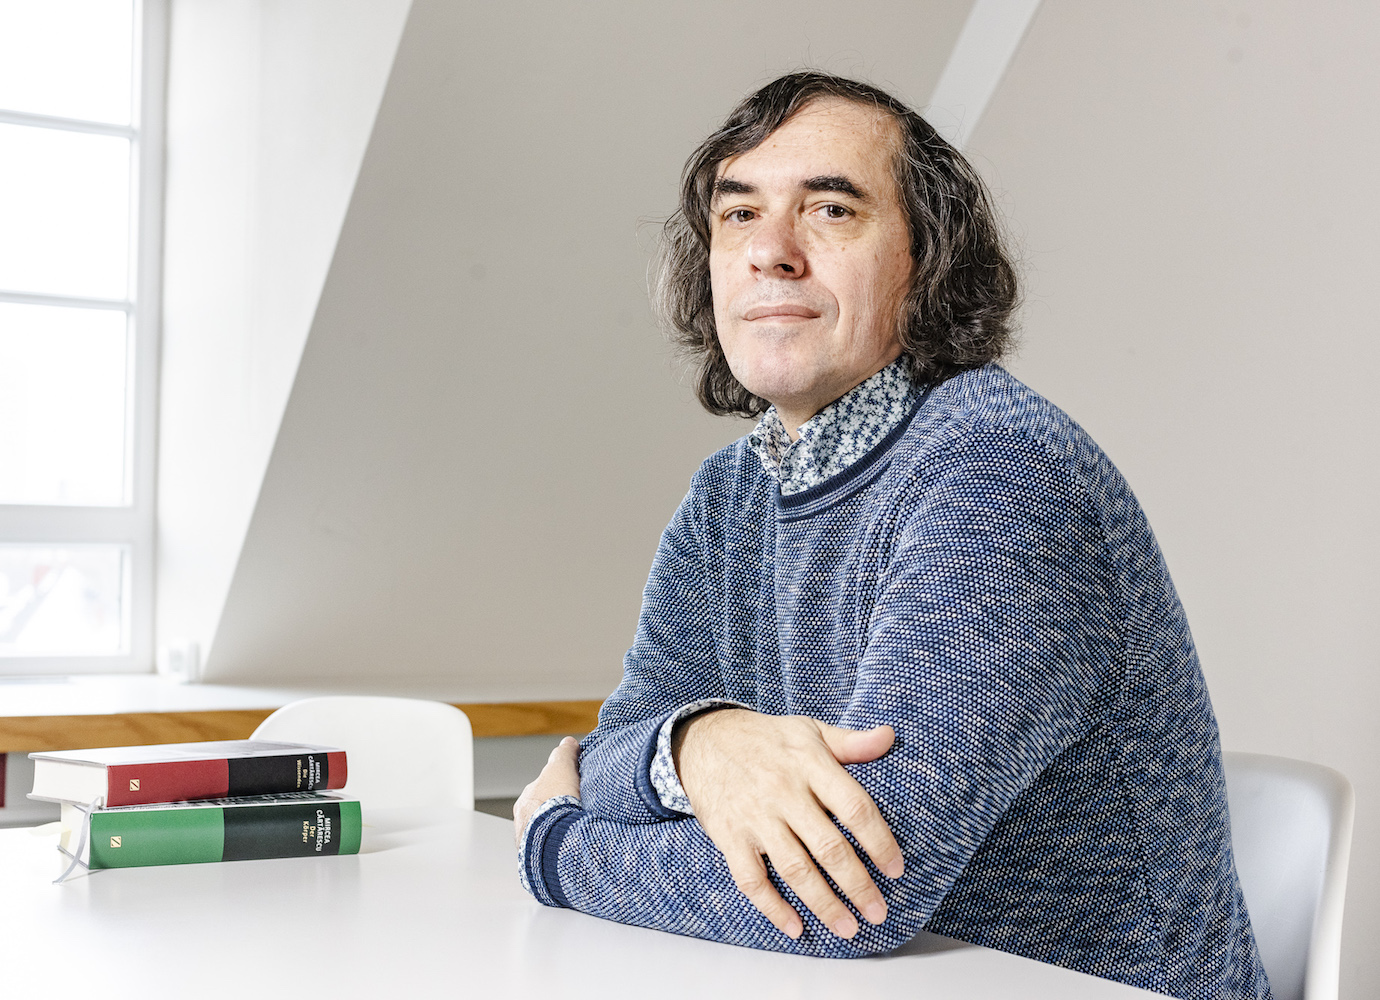 ‘A writer should express the human condition on every page:’ Romanian literary star Mircea Cărtărescu on life, literature and success 